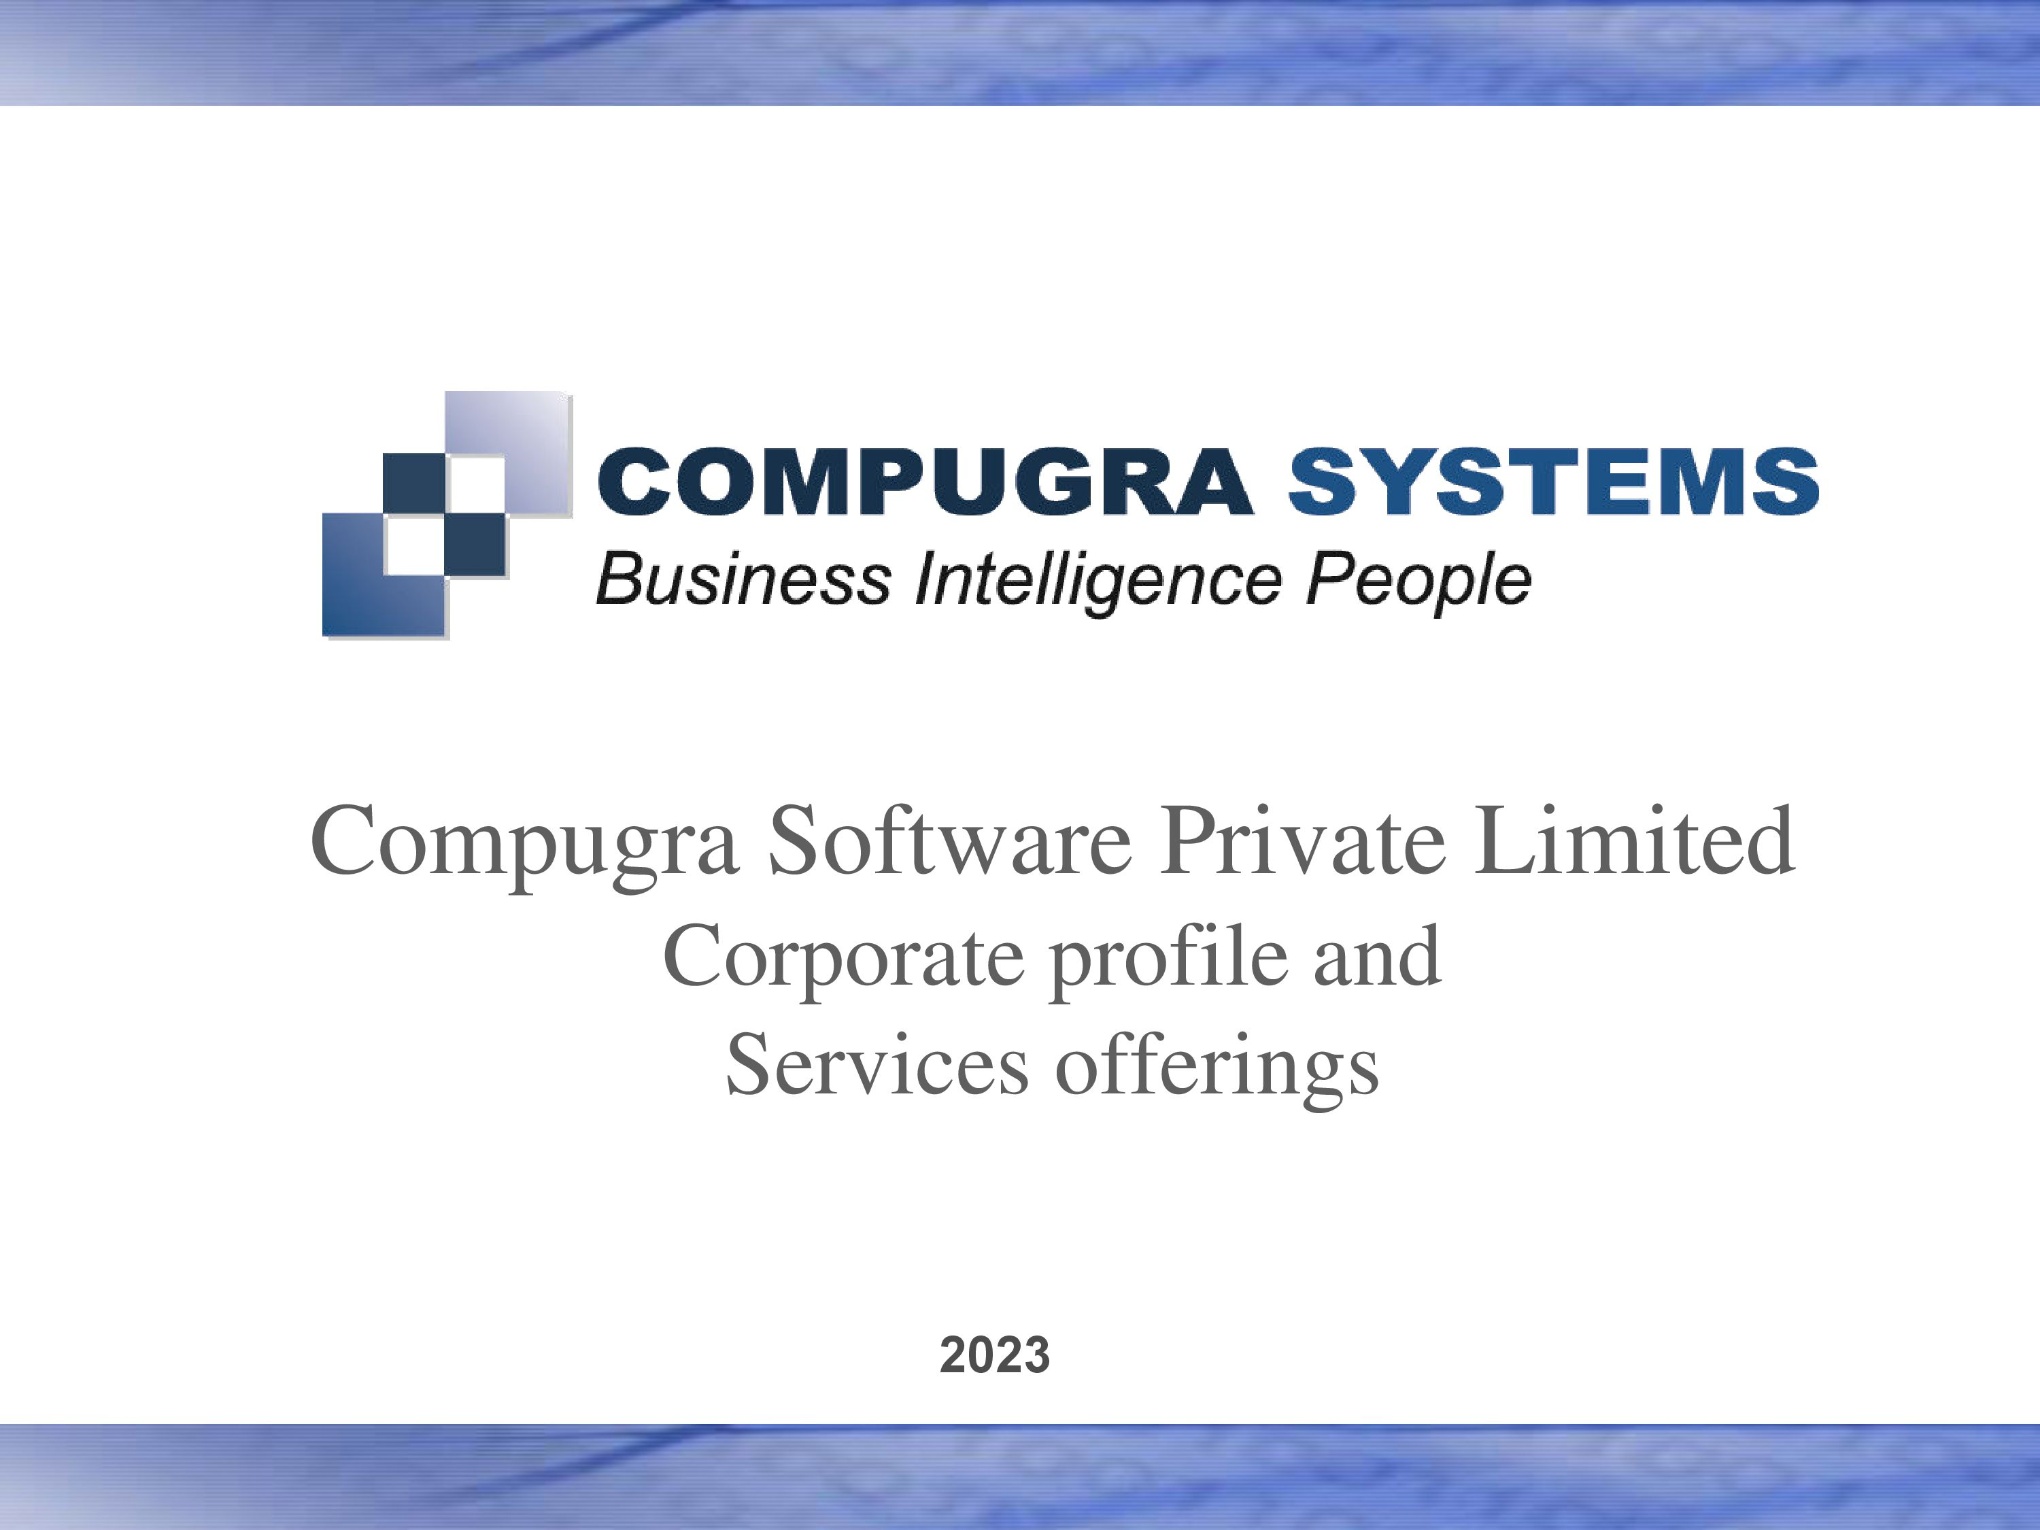 Compugra Software Private Limited